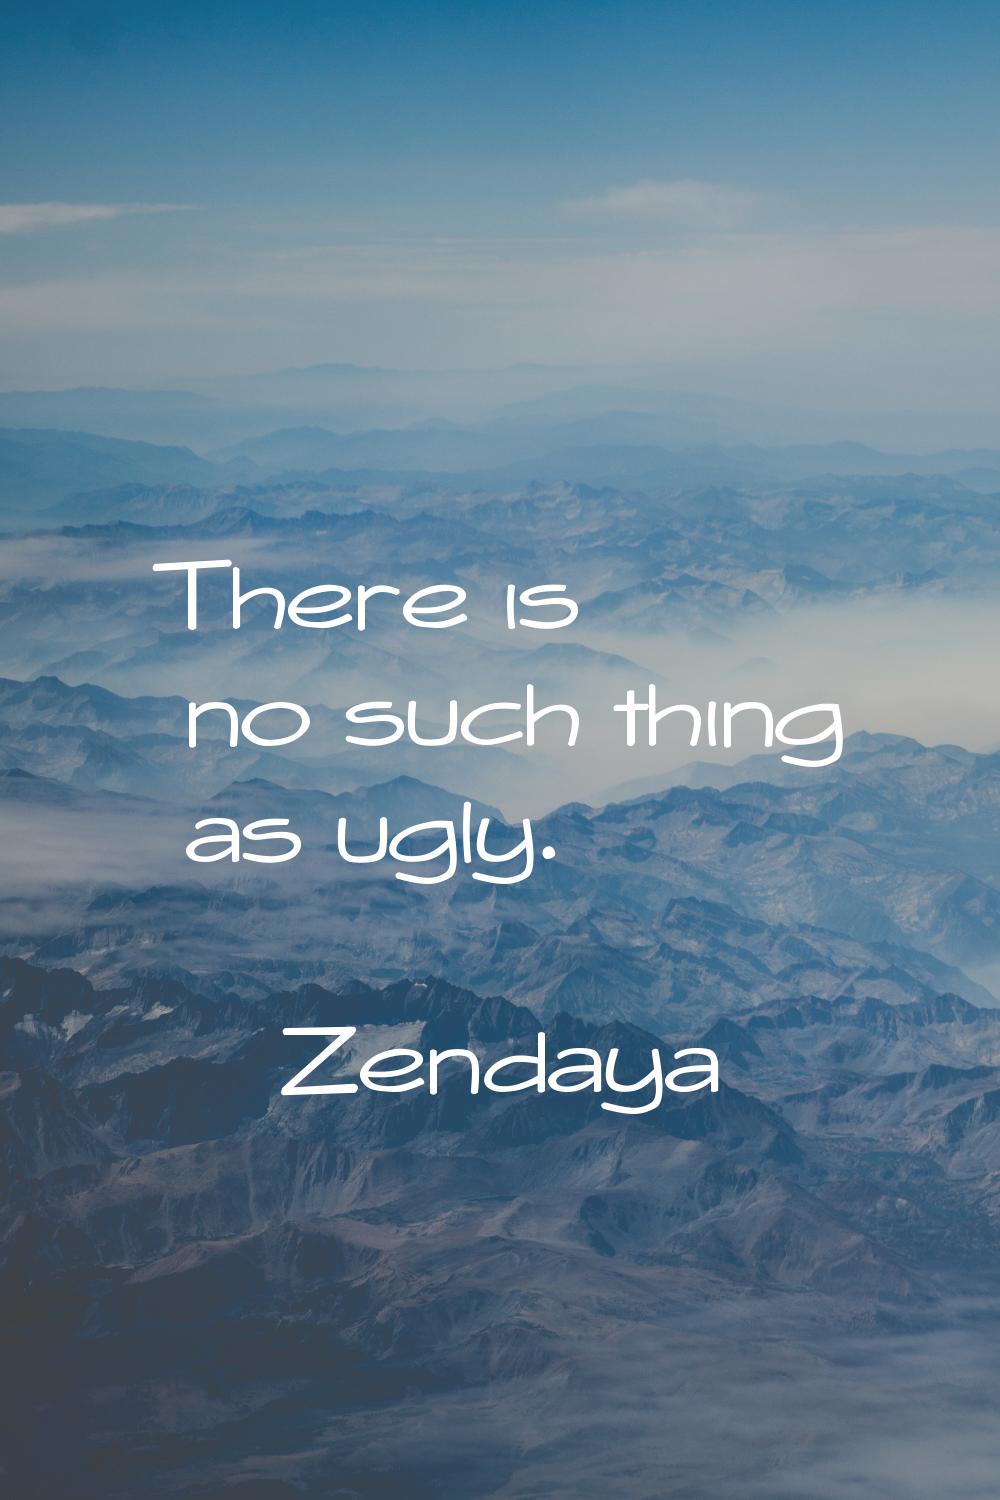 There is no such thing as ugly.